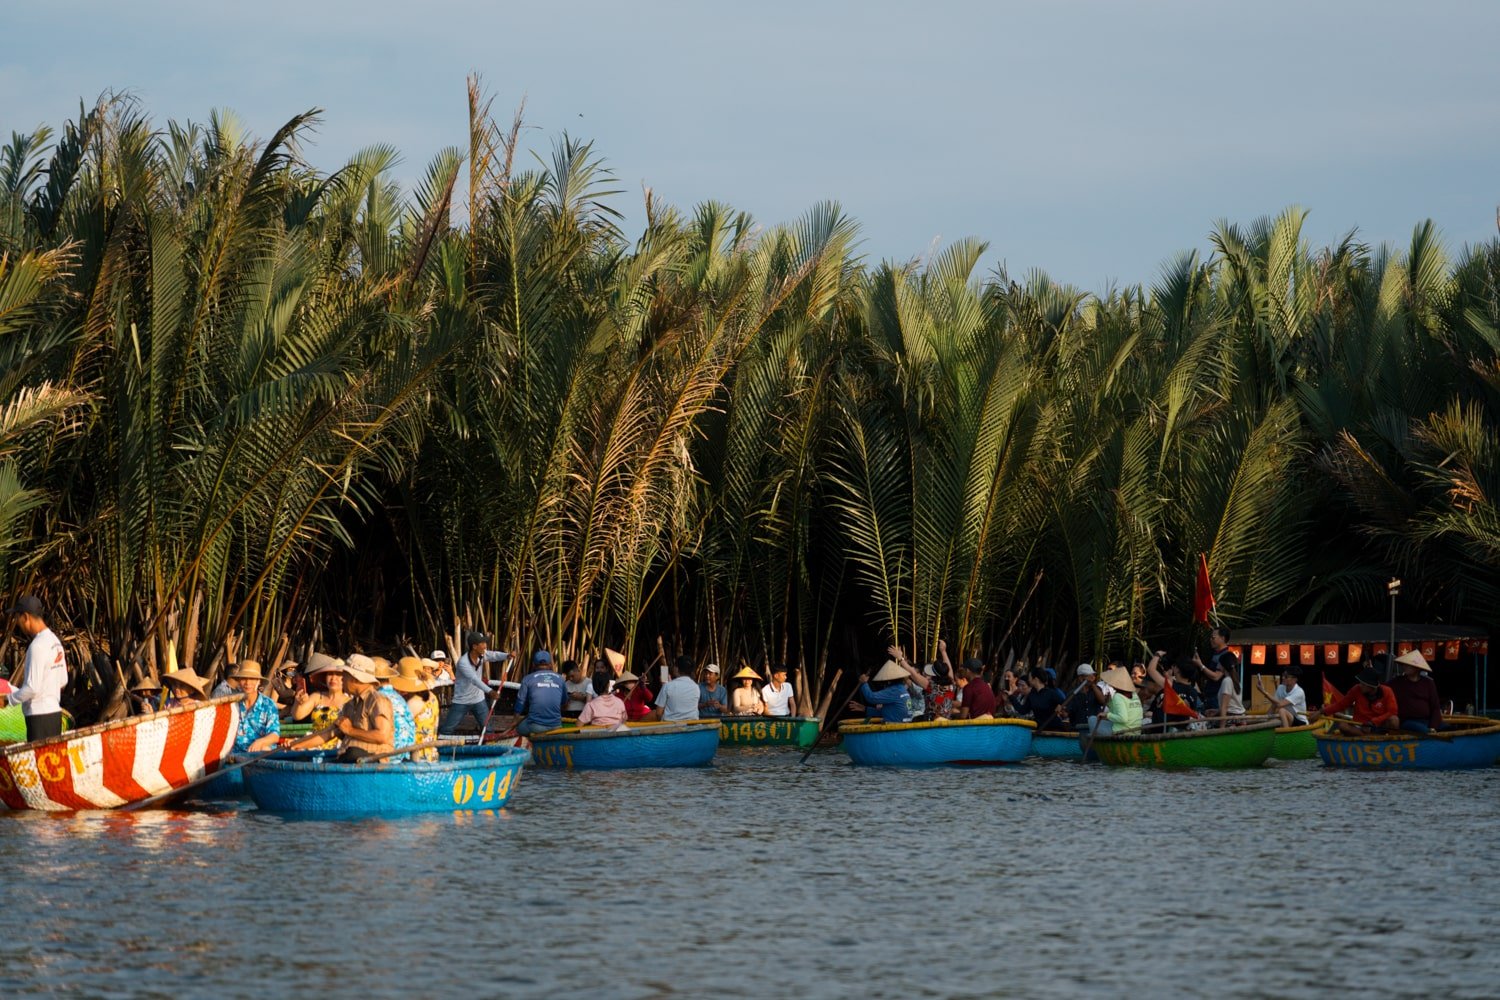 Bay Mau coconut forest and crowds of tourists in basket boats.